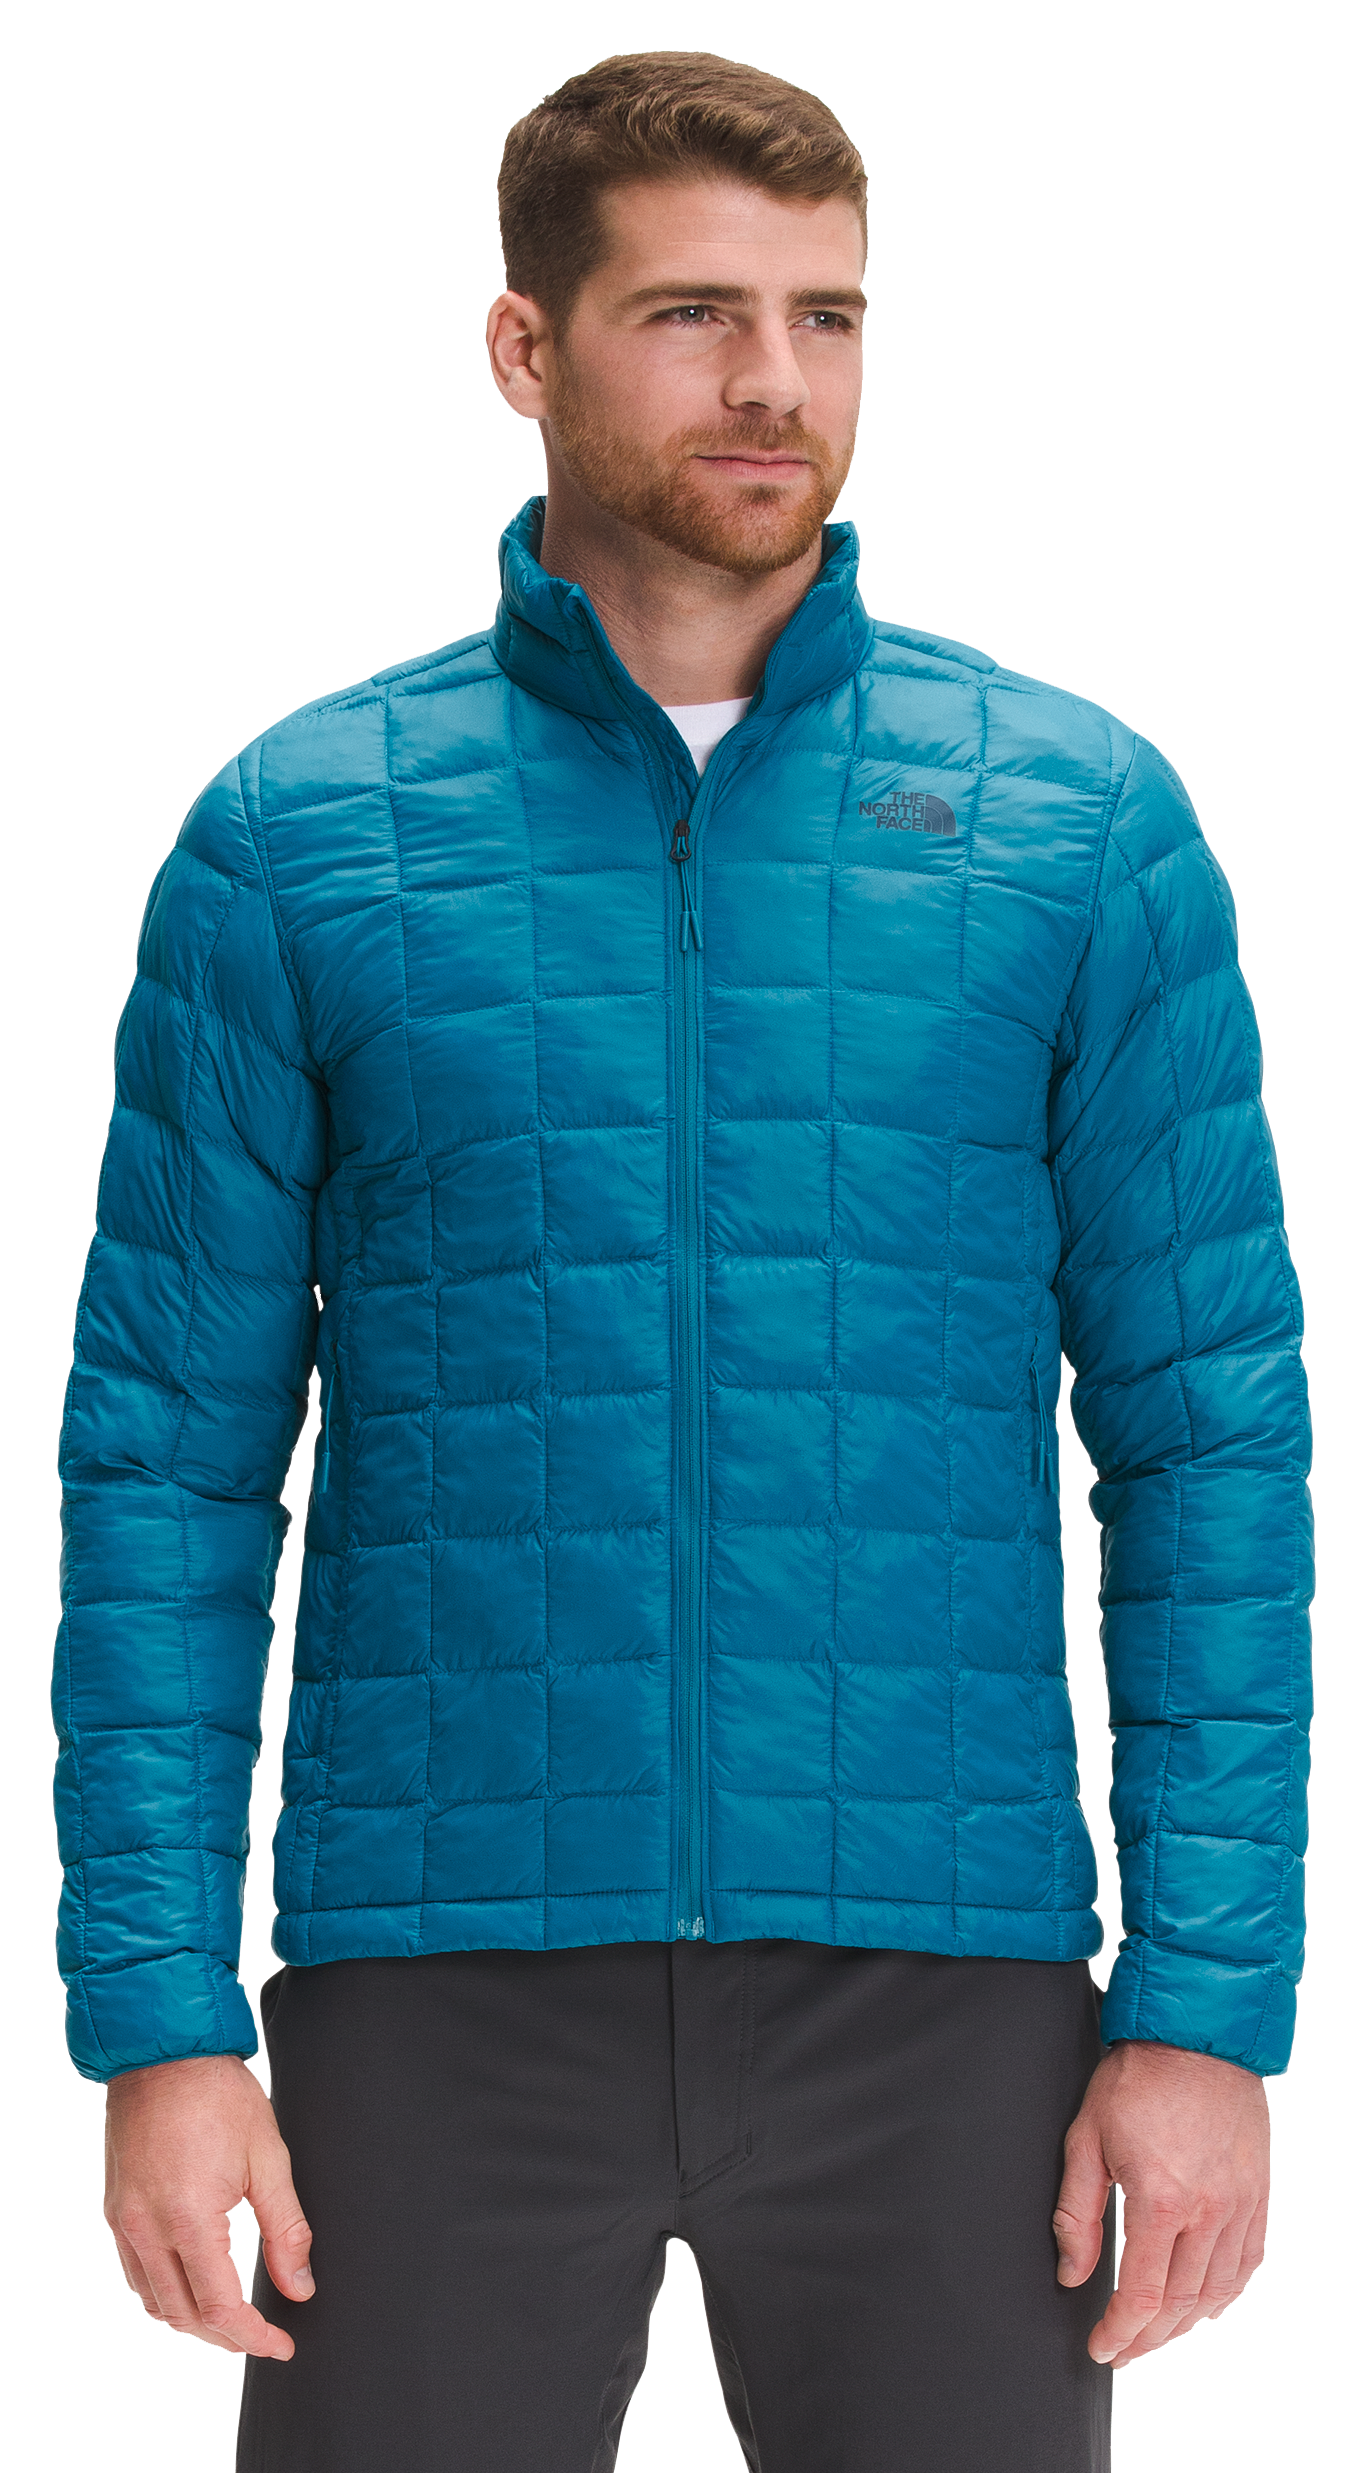 The North Face ThermoBall Eco Quilted Jacket for Men - Banff Blue - M